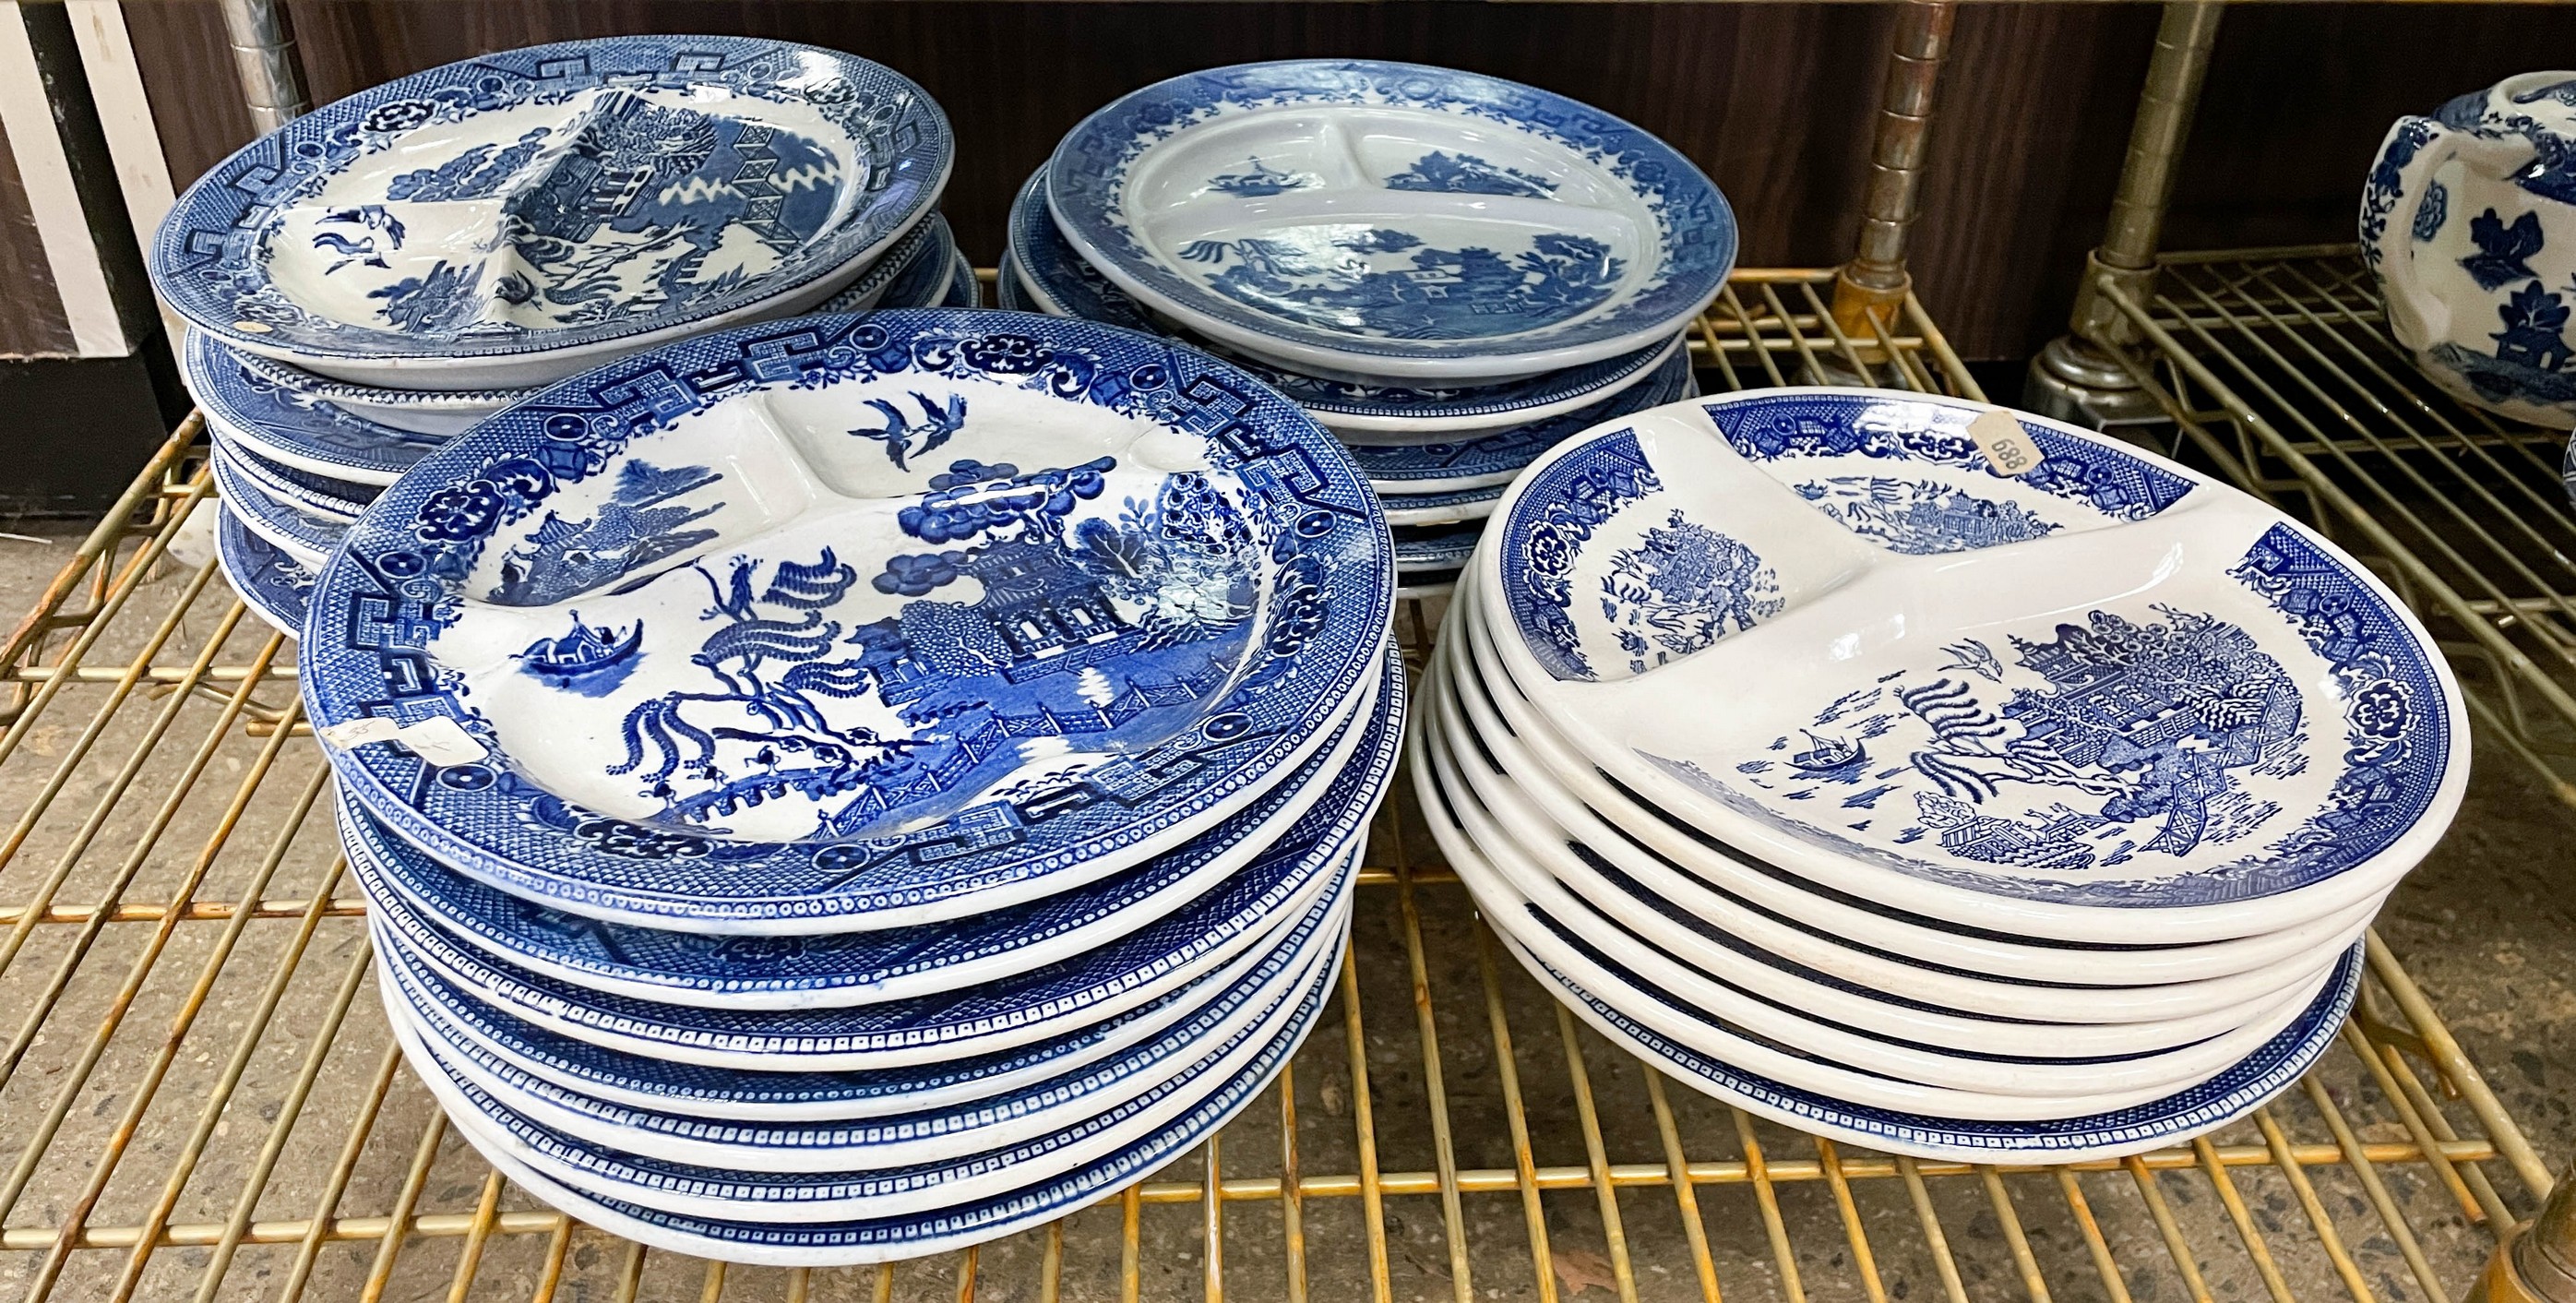  27 Blue Willow porcelain divided 27a84a